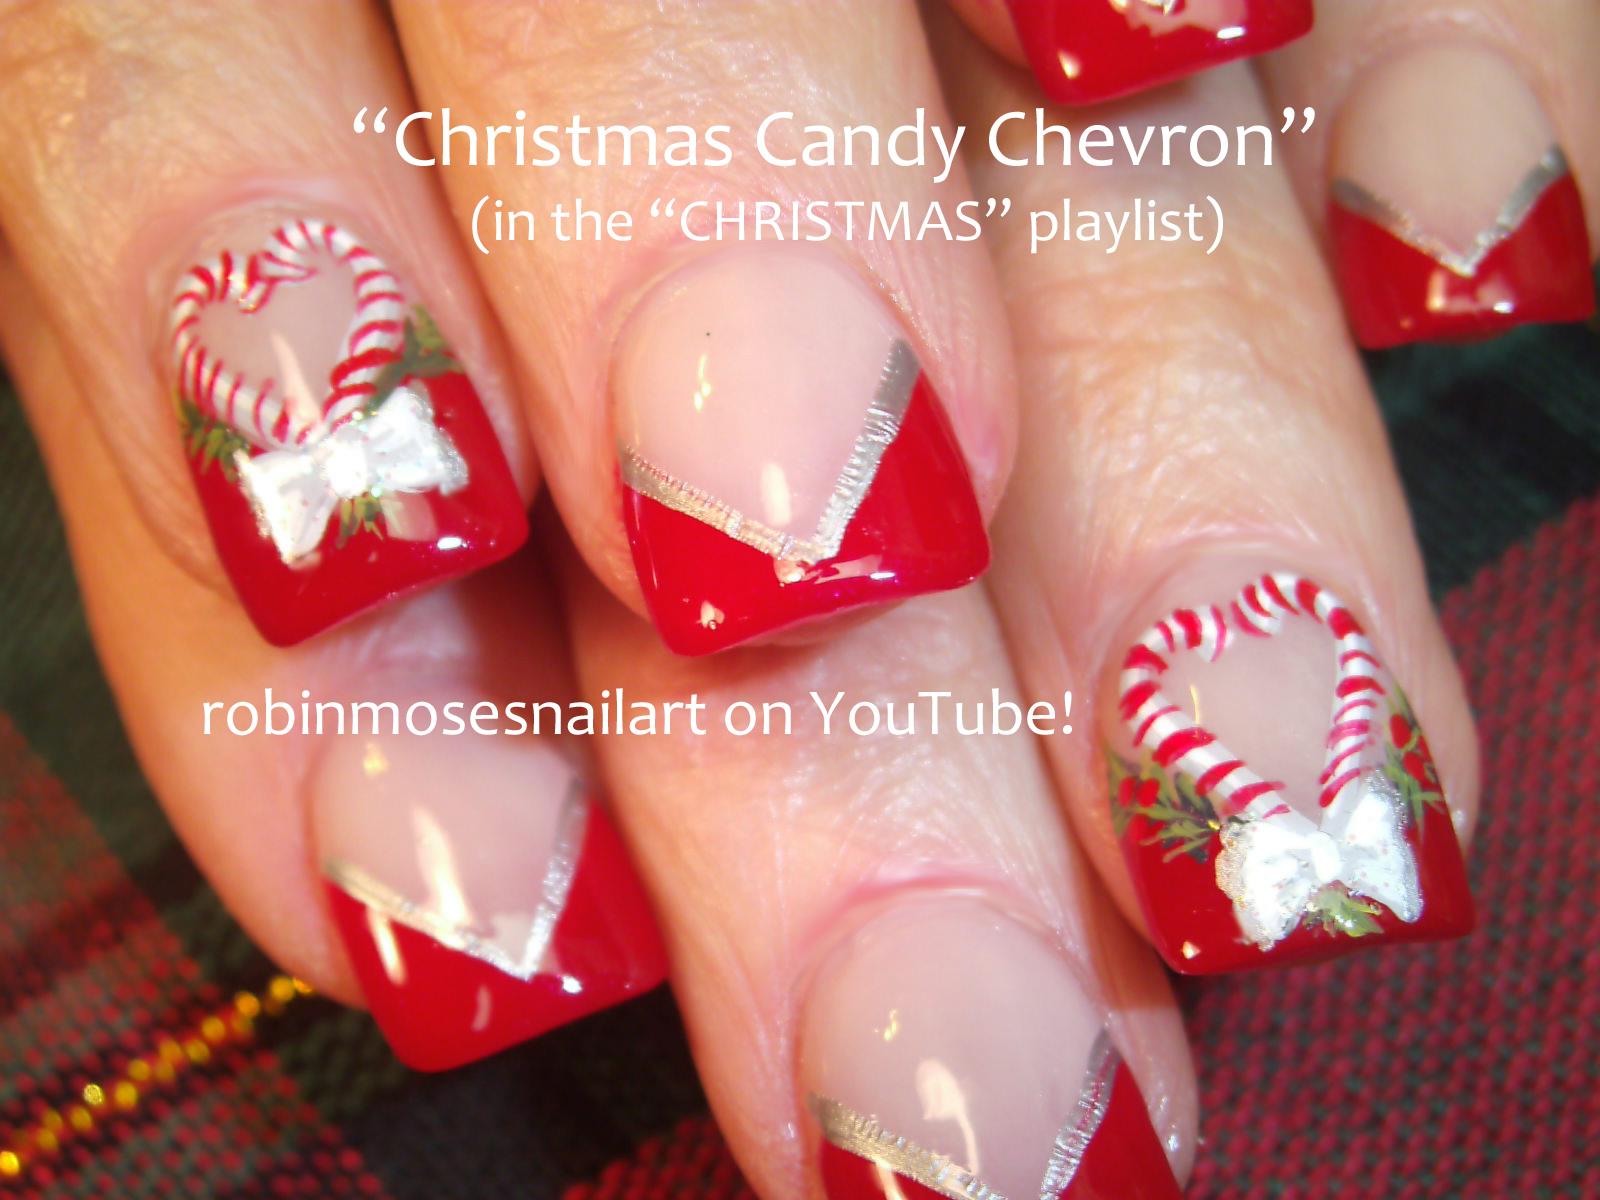 7. Candy Cane Nail Art with Glitter - wide 1